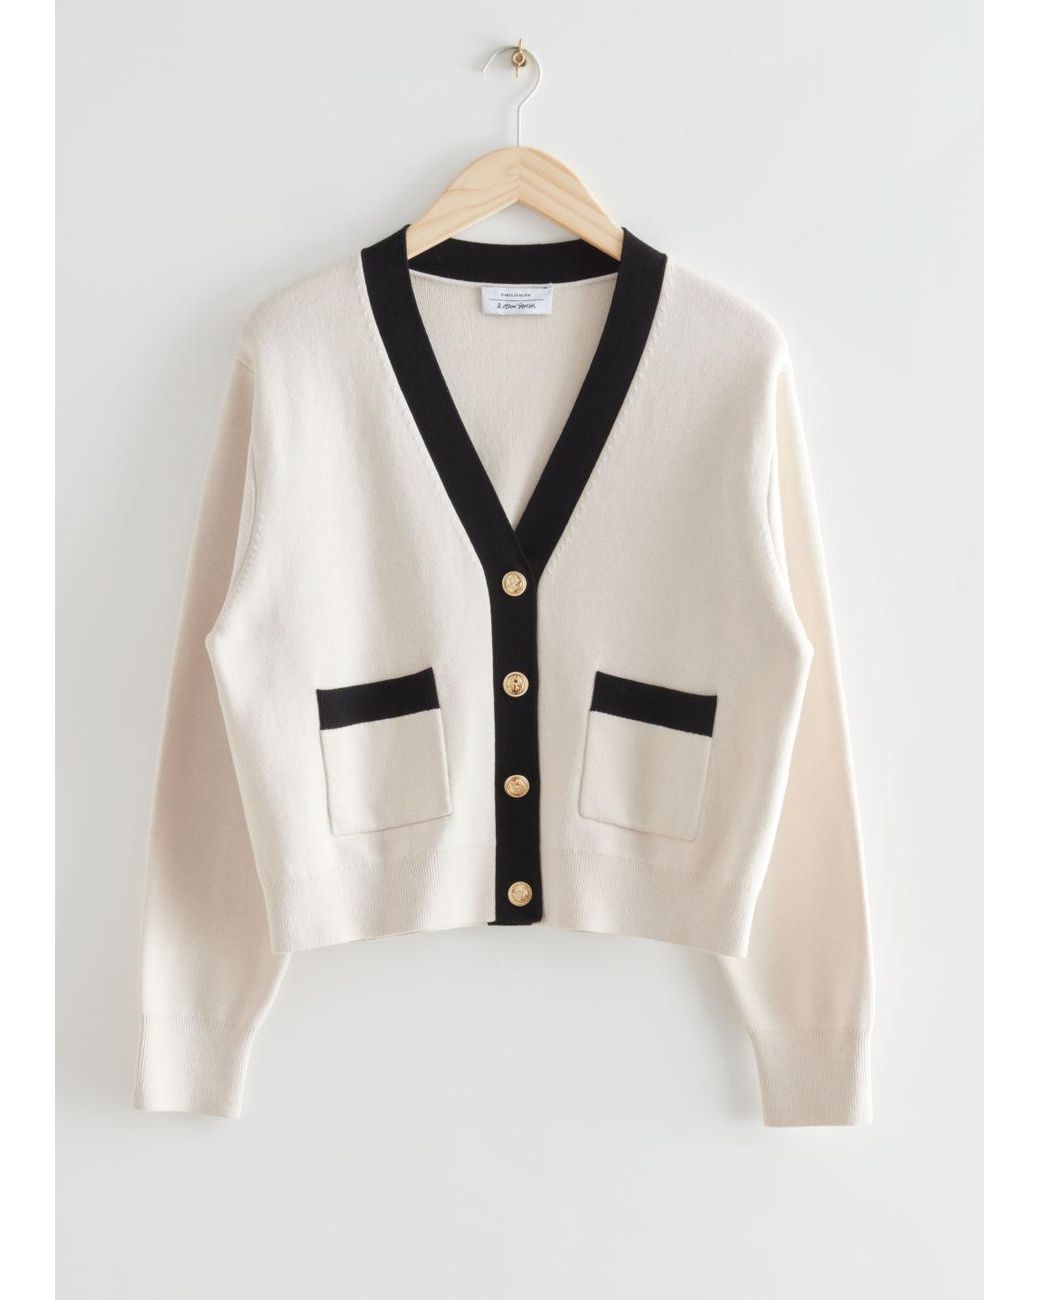 & Other Stories Cropped Gold Button Cardigan in White | Lyst